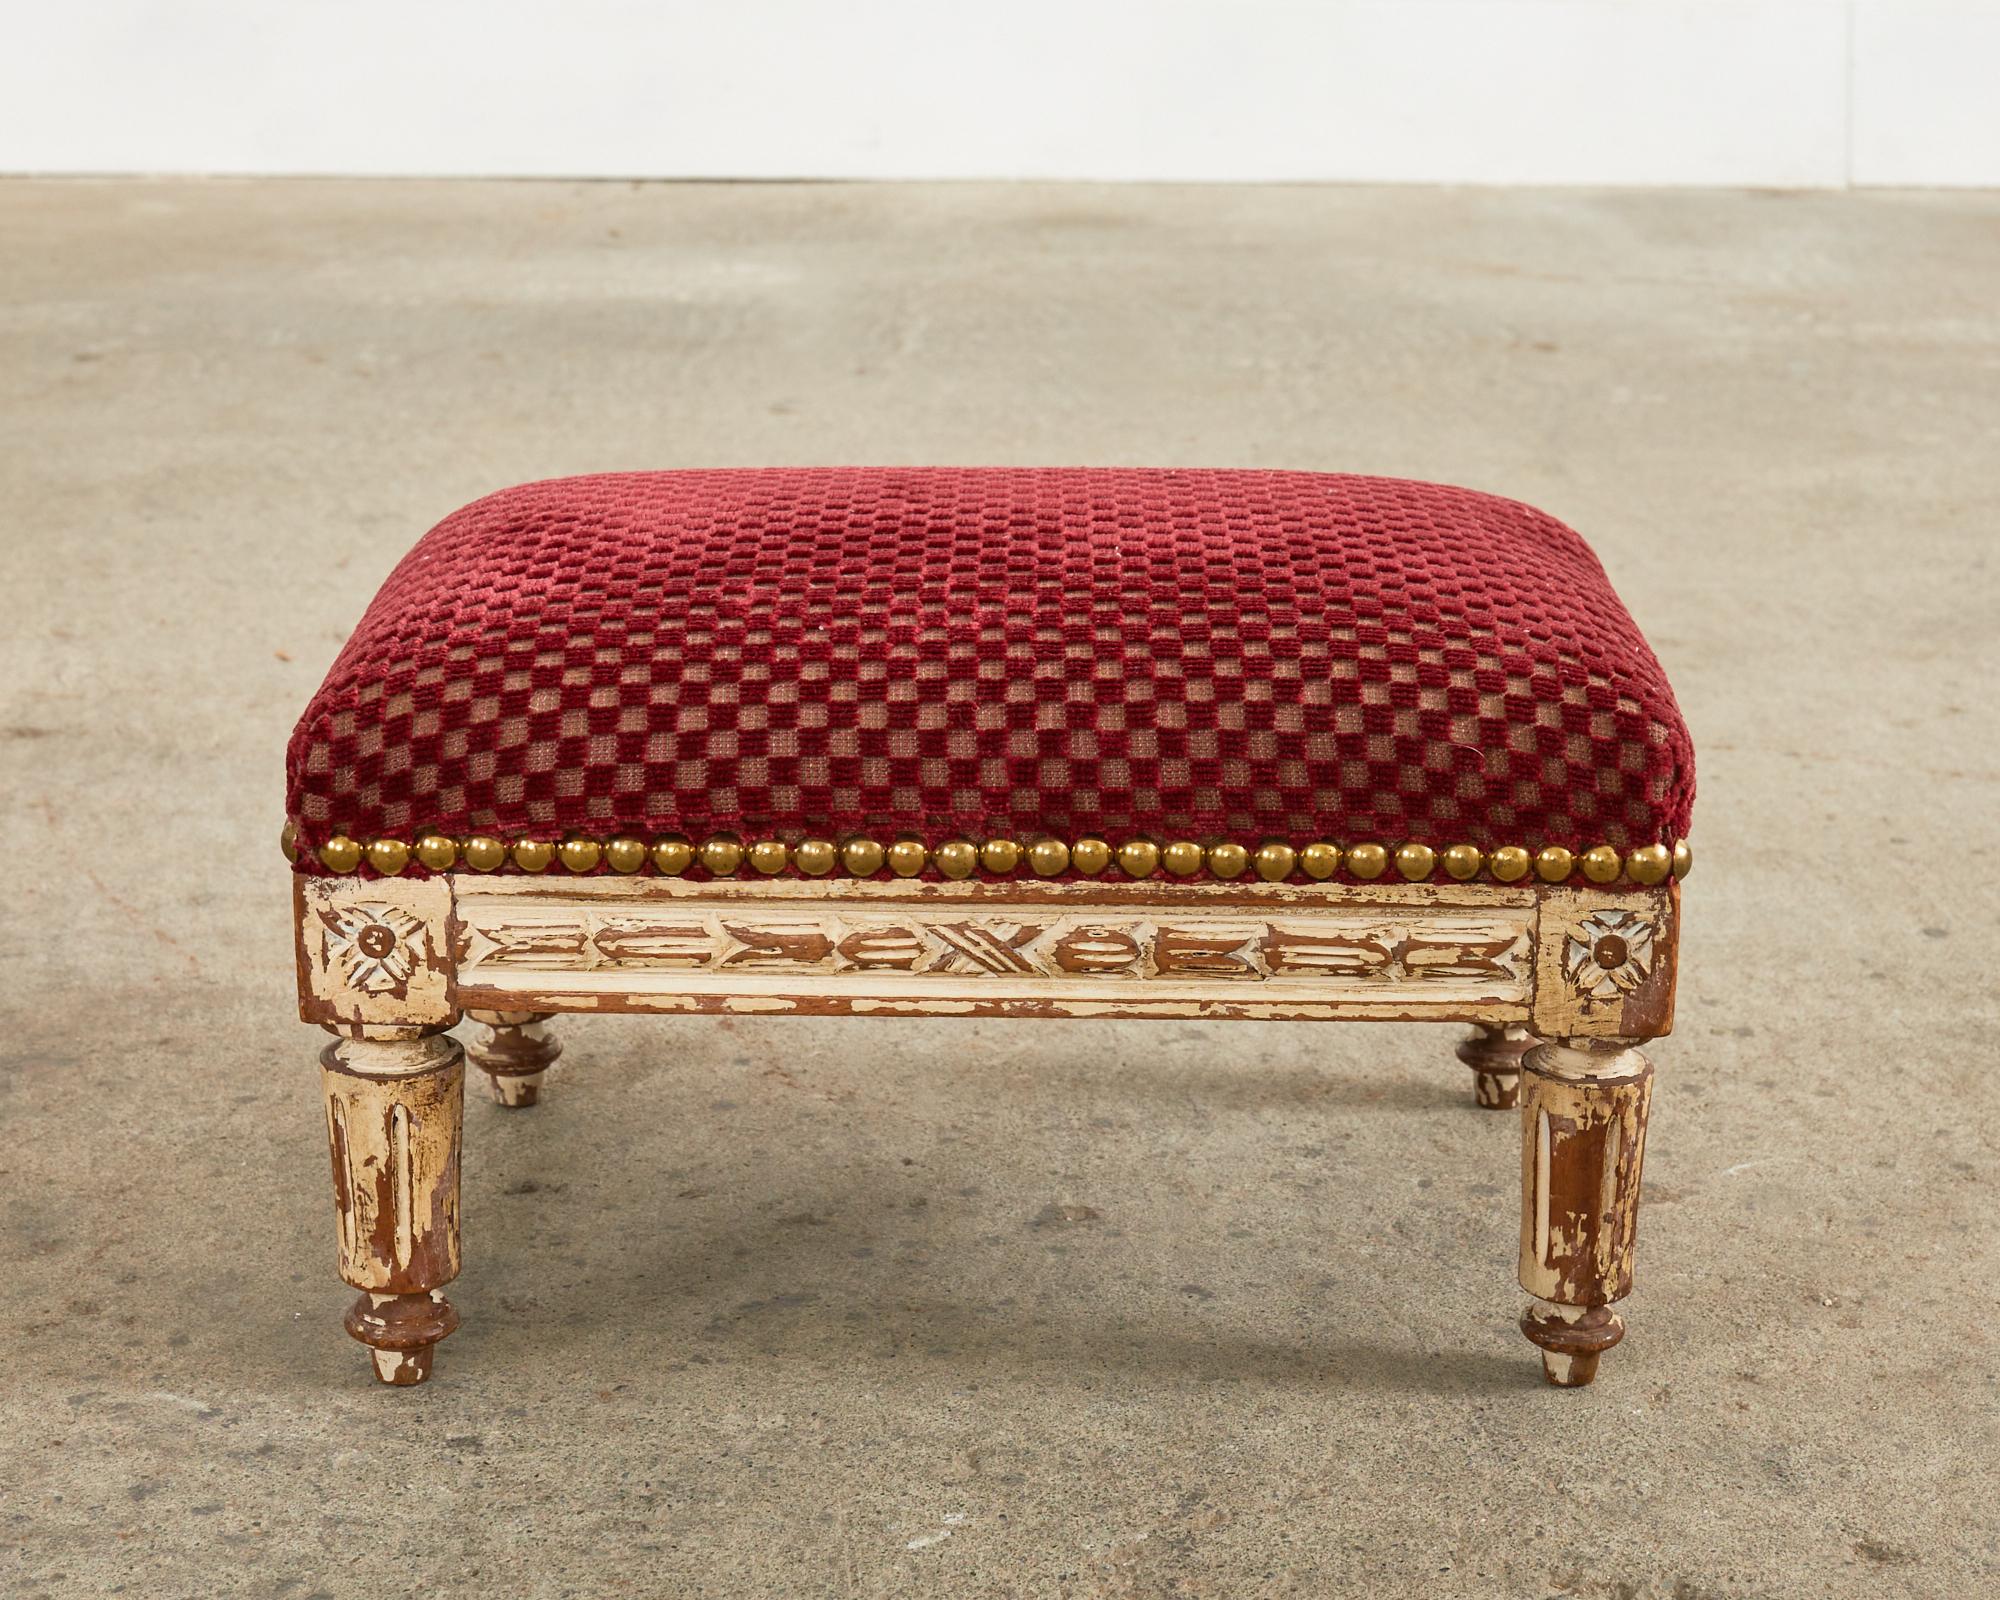 19th Century French Louis XVI Diminutive Painted Mahogany Footstool For Sale 6